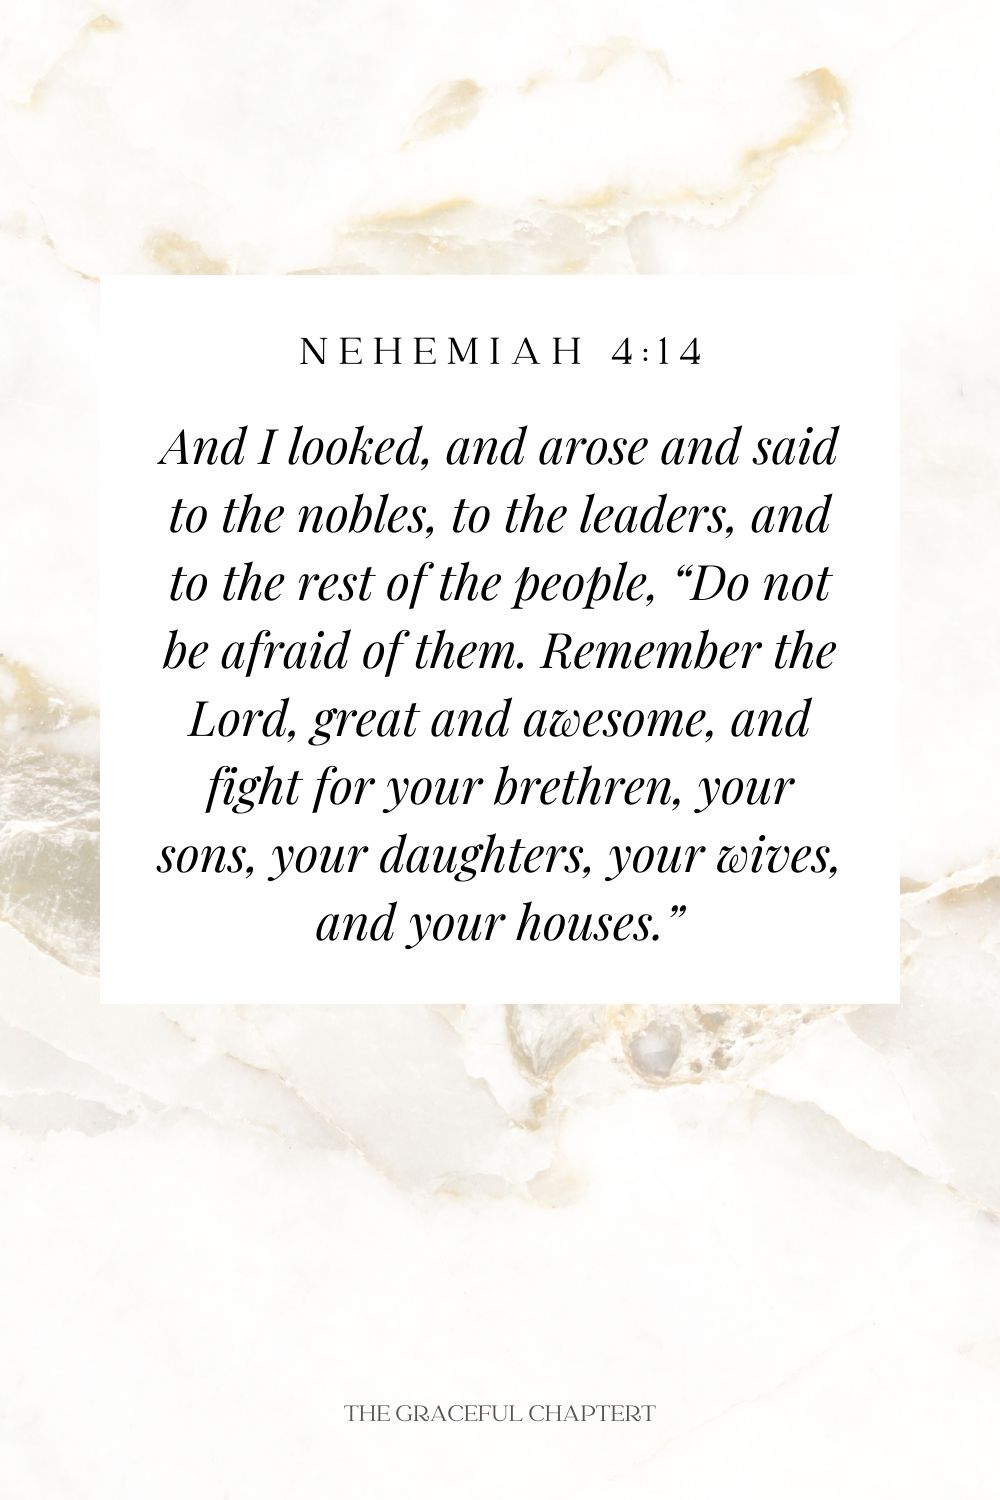 And I looked, and arose and said to the nobles, to the leaders, and to the rest of the people, “Do not be afraid of them. Remember the Lord, great and awesome, and fight for your brethren, your sons, your daughters, your wives, and your houses.” Nehemiah 4:14